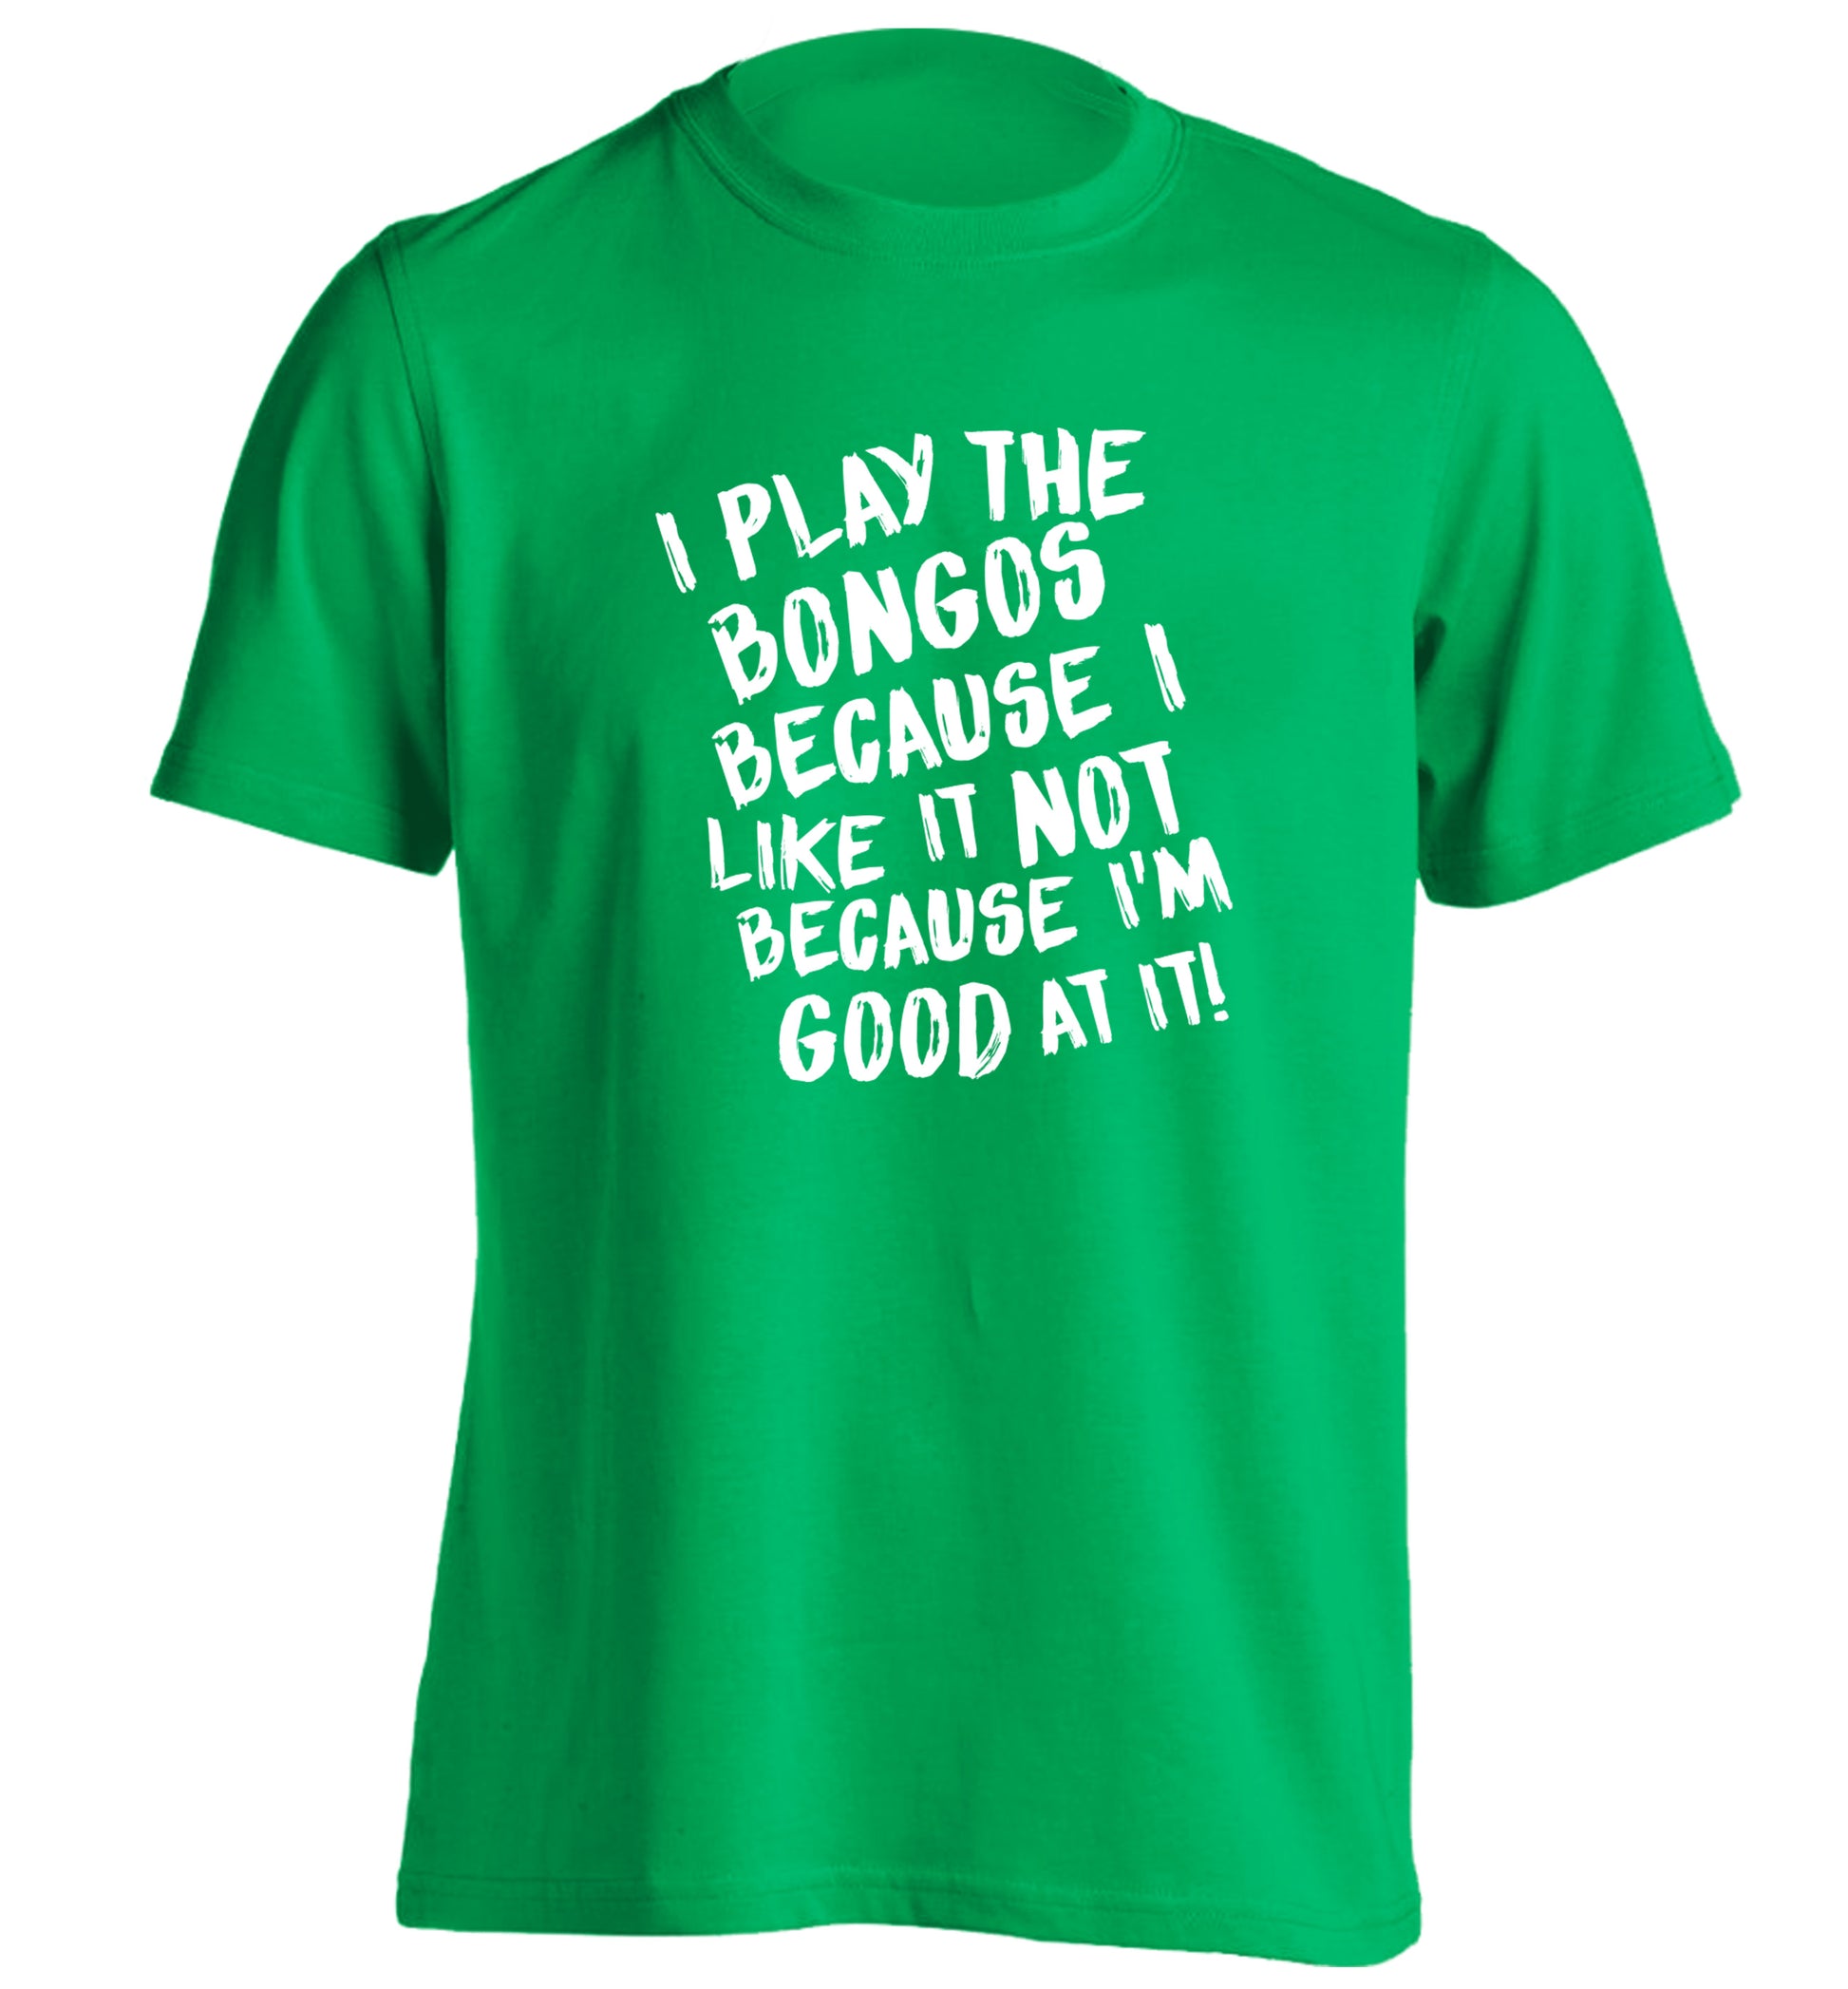 I play the bongos because I like it not because I'm good at it adults unisex green Tshirt 2XL